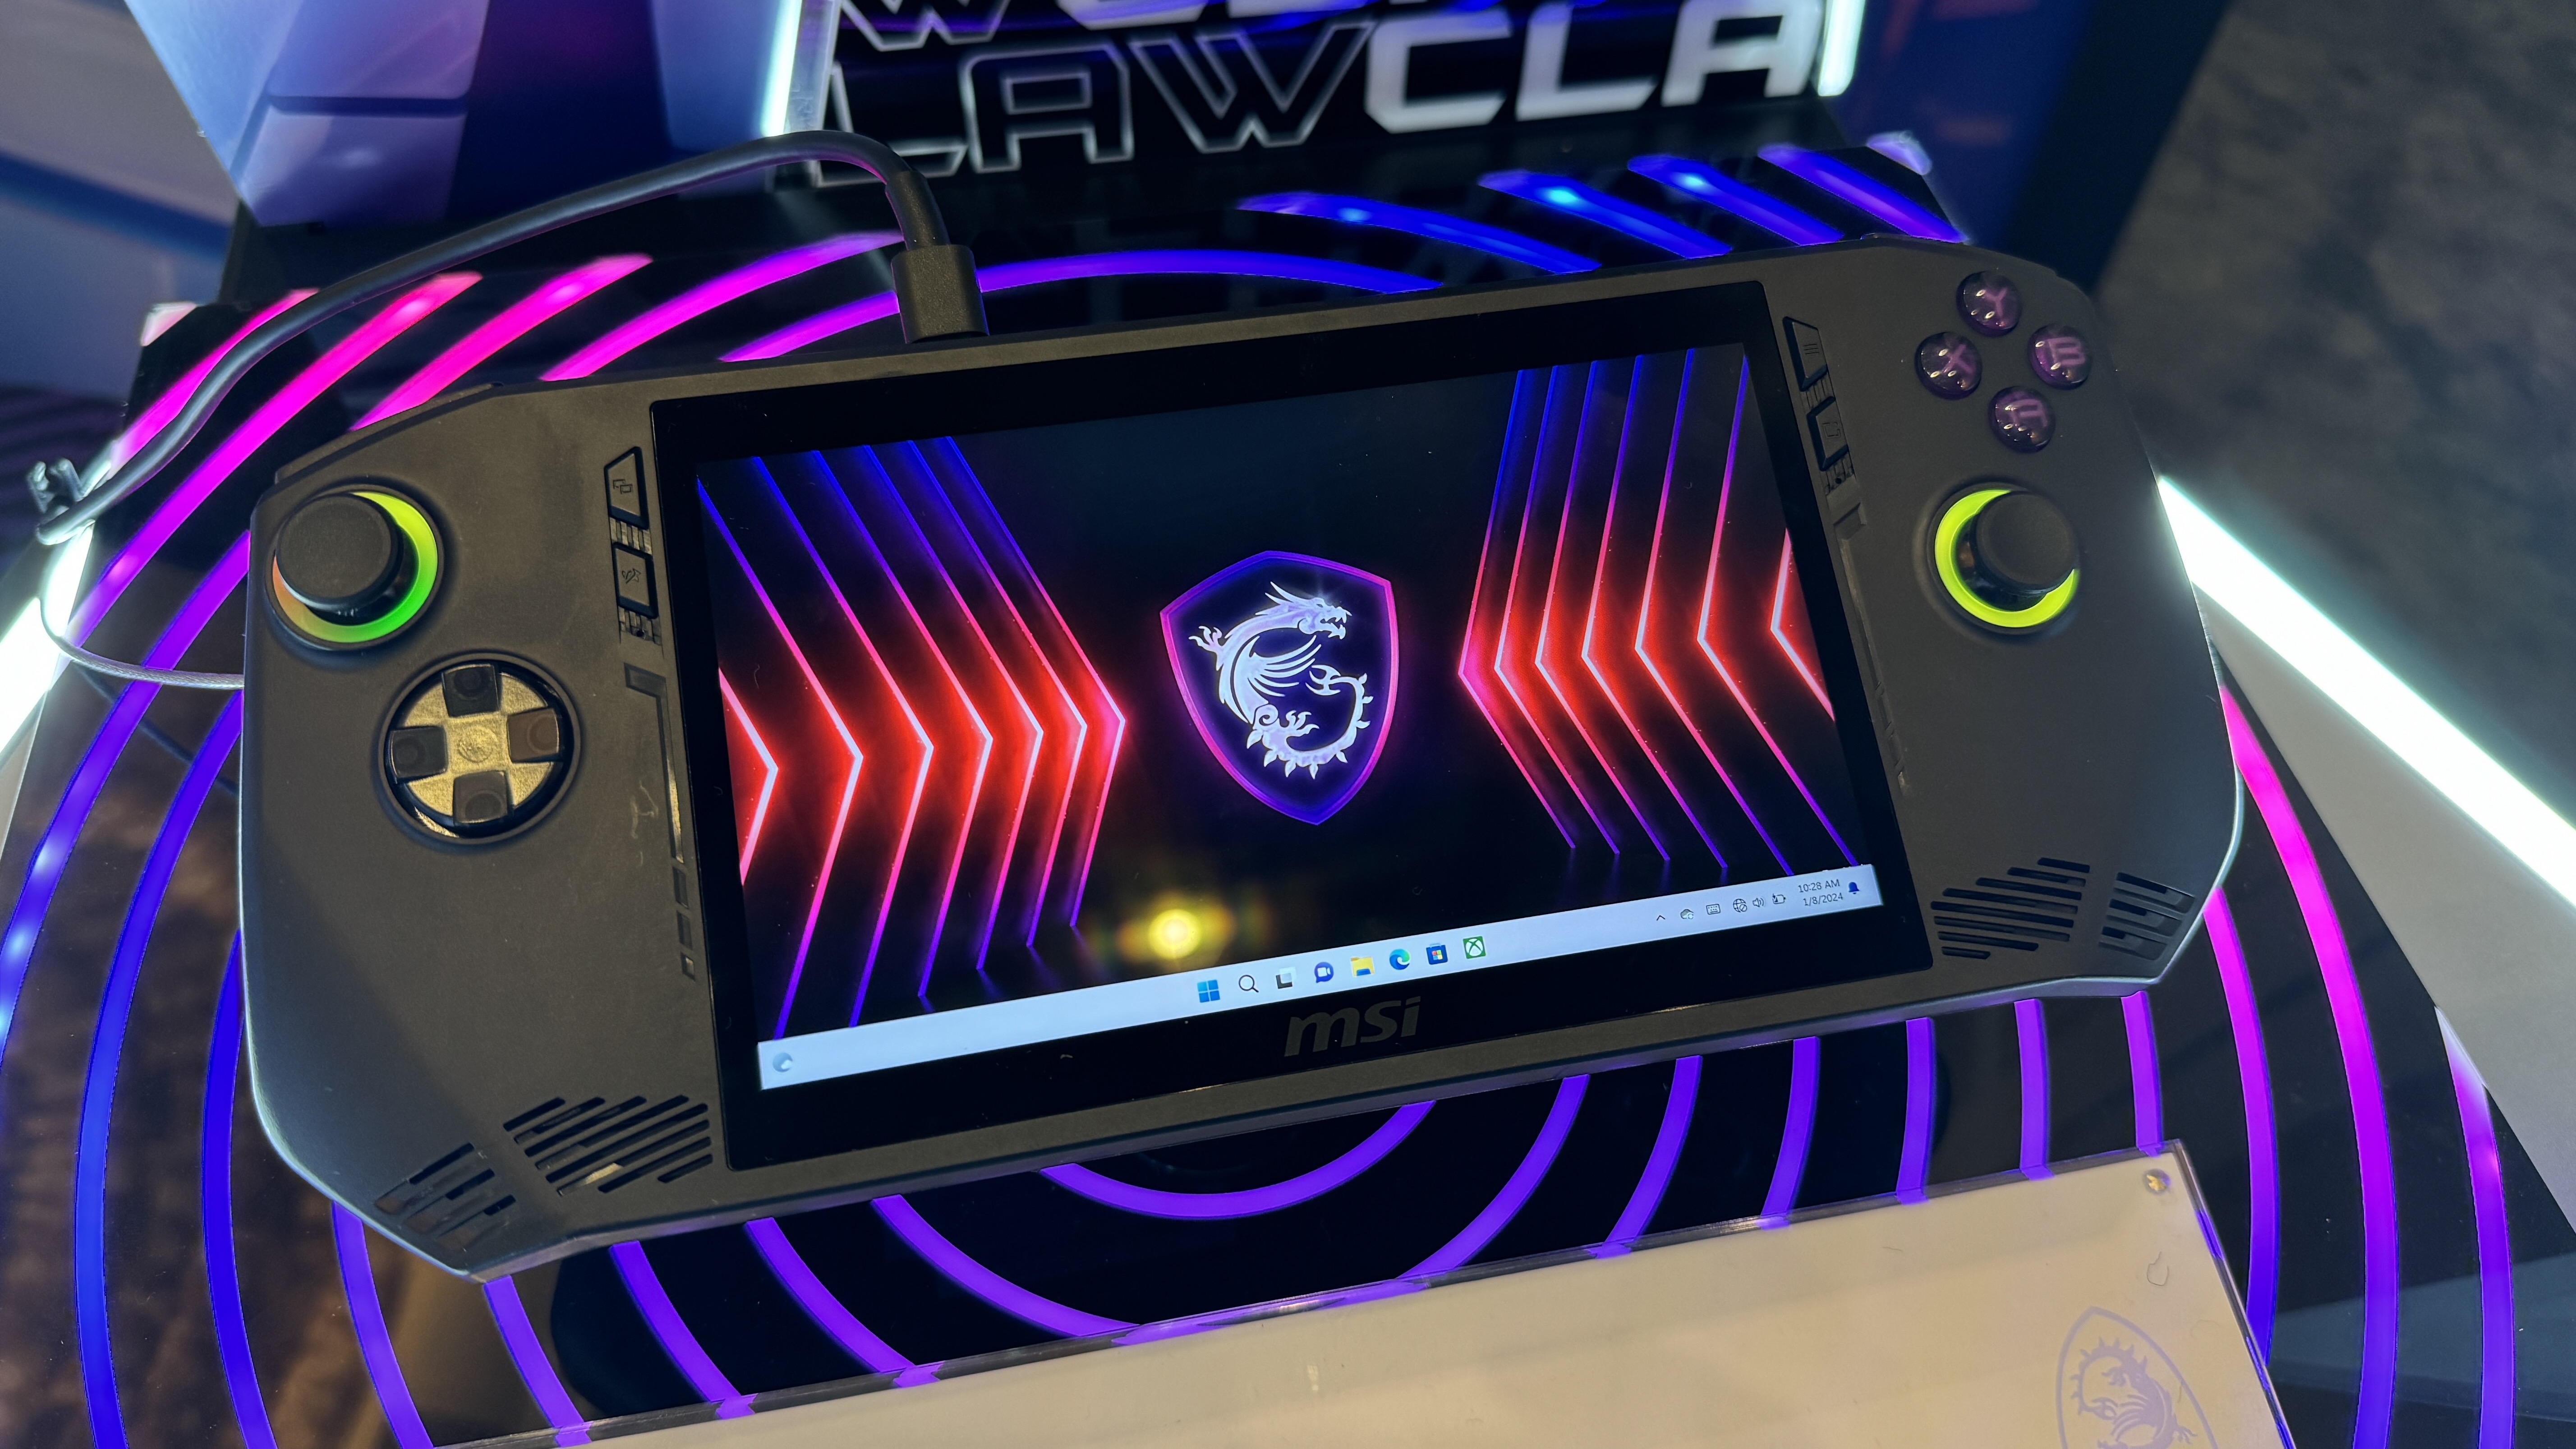 Claw Series Handheld Gaming Computer - MSI-US Official Store